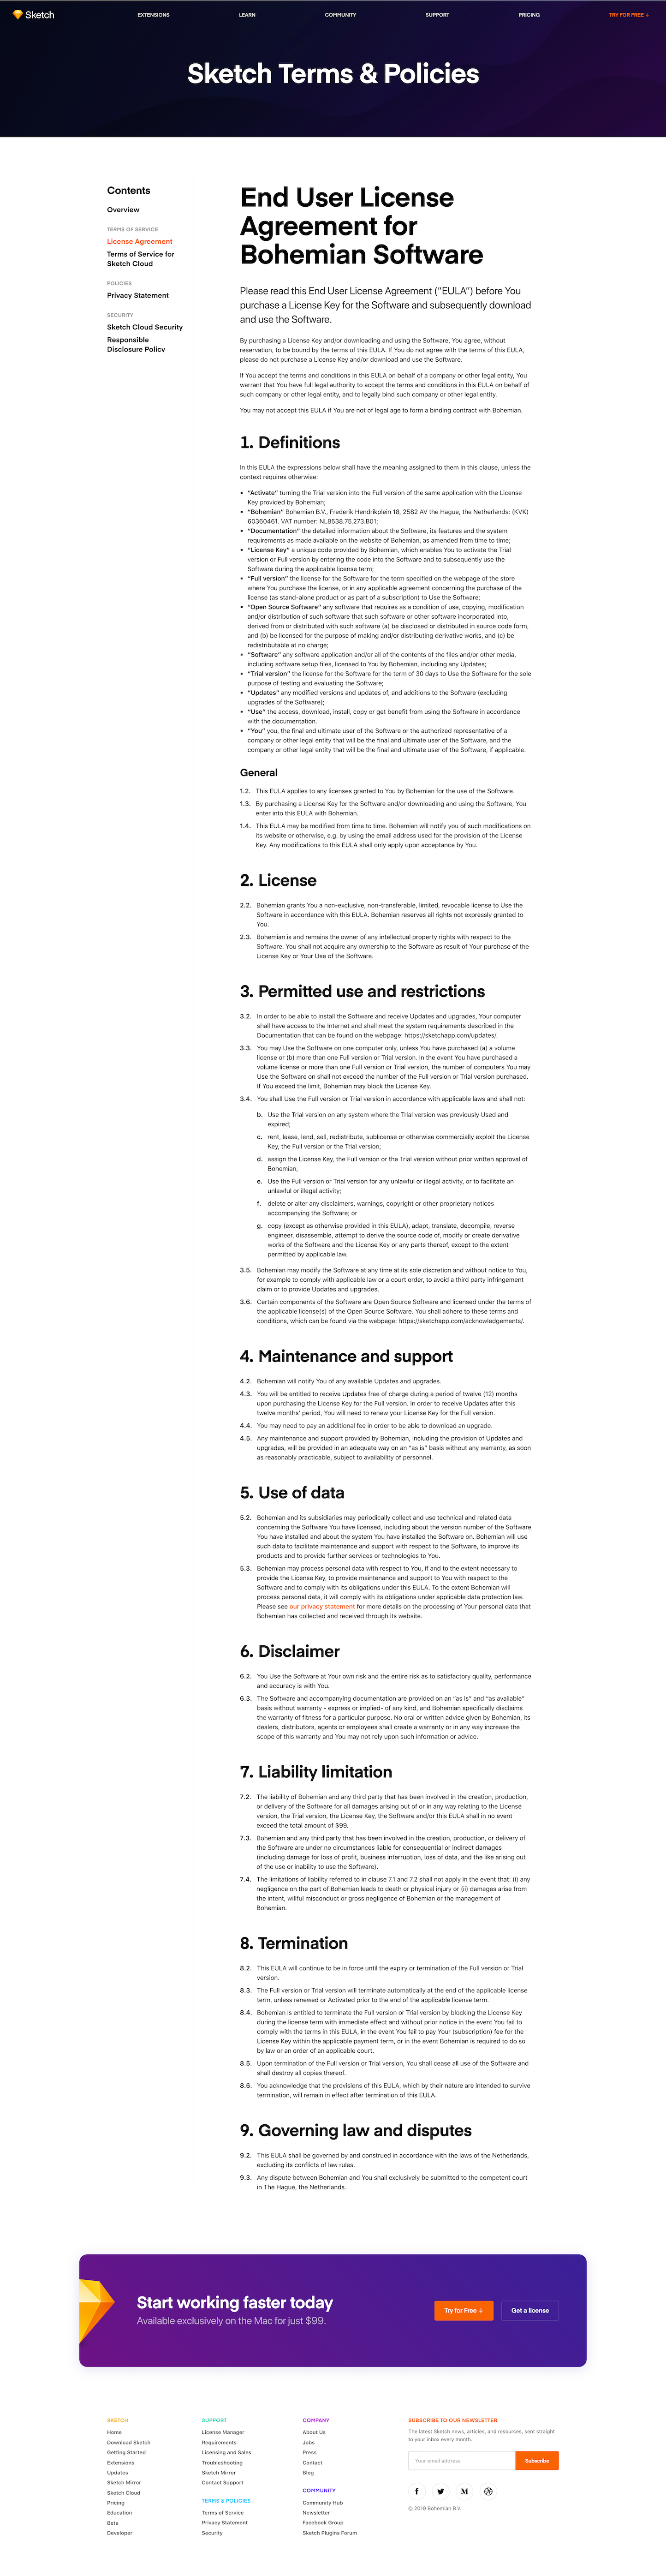 Screenshot of the Terms & Policies page from the Sketch website.